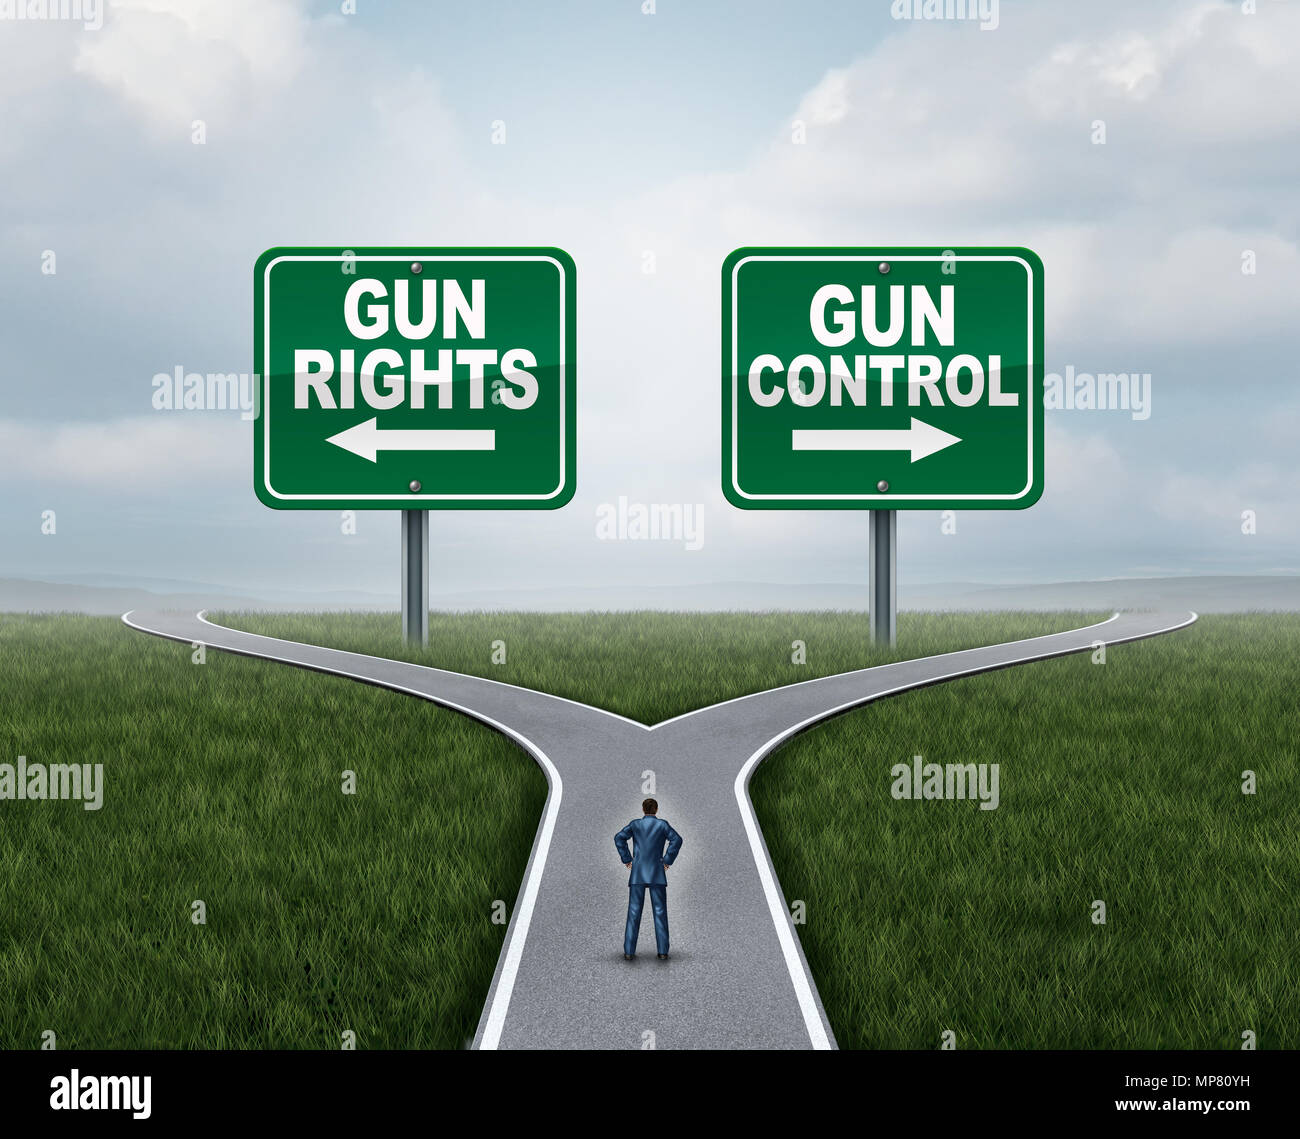 Gun control or guns control and second amendment United States debate as a government firearms federal or state law policy. Stock Photo